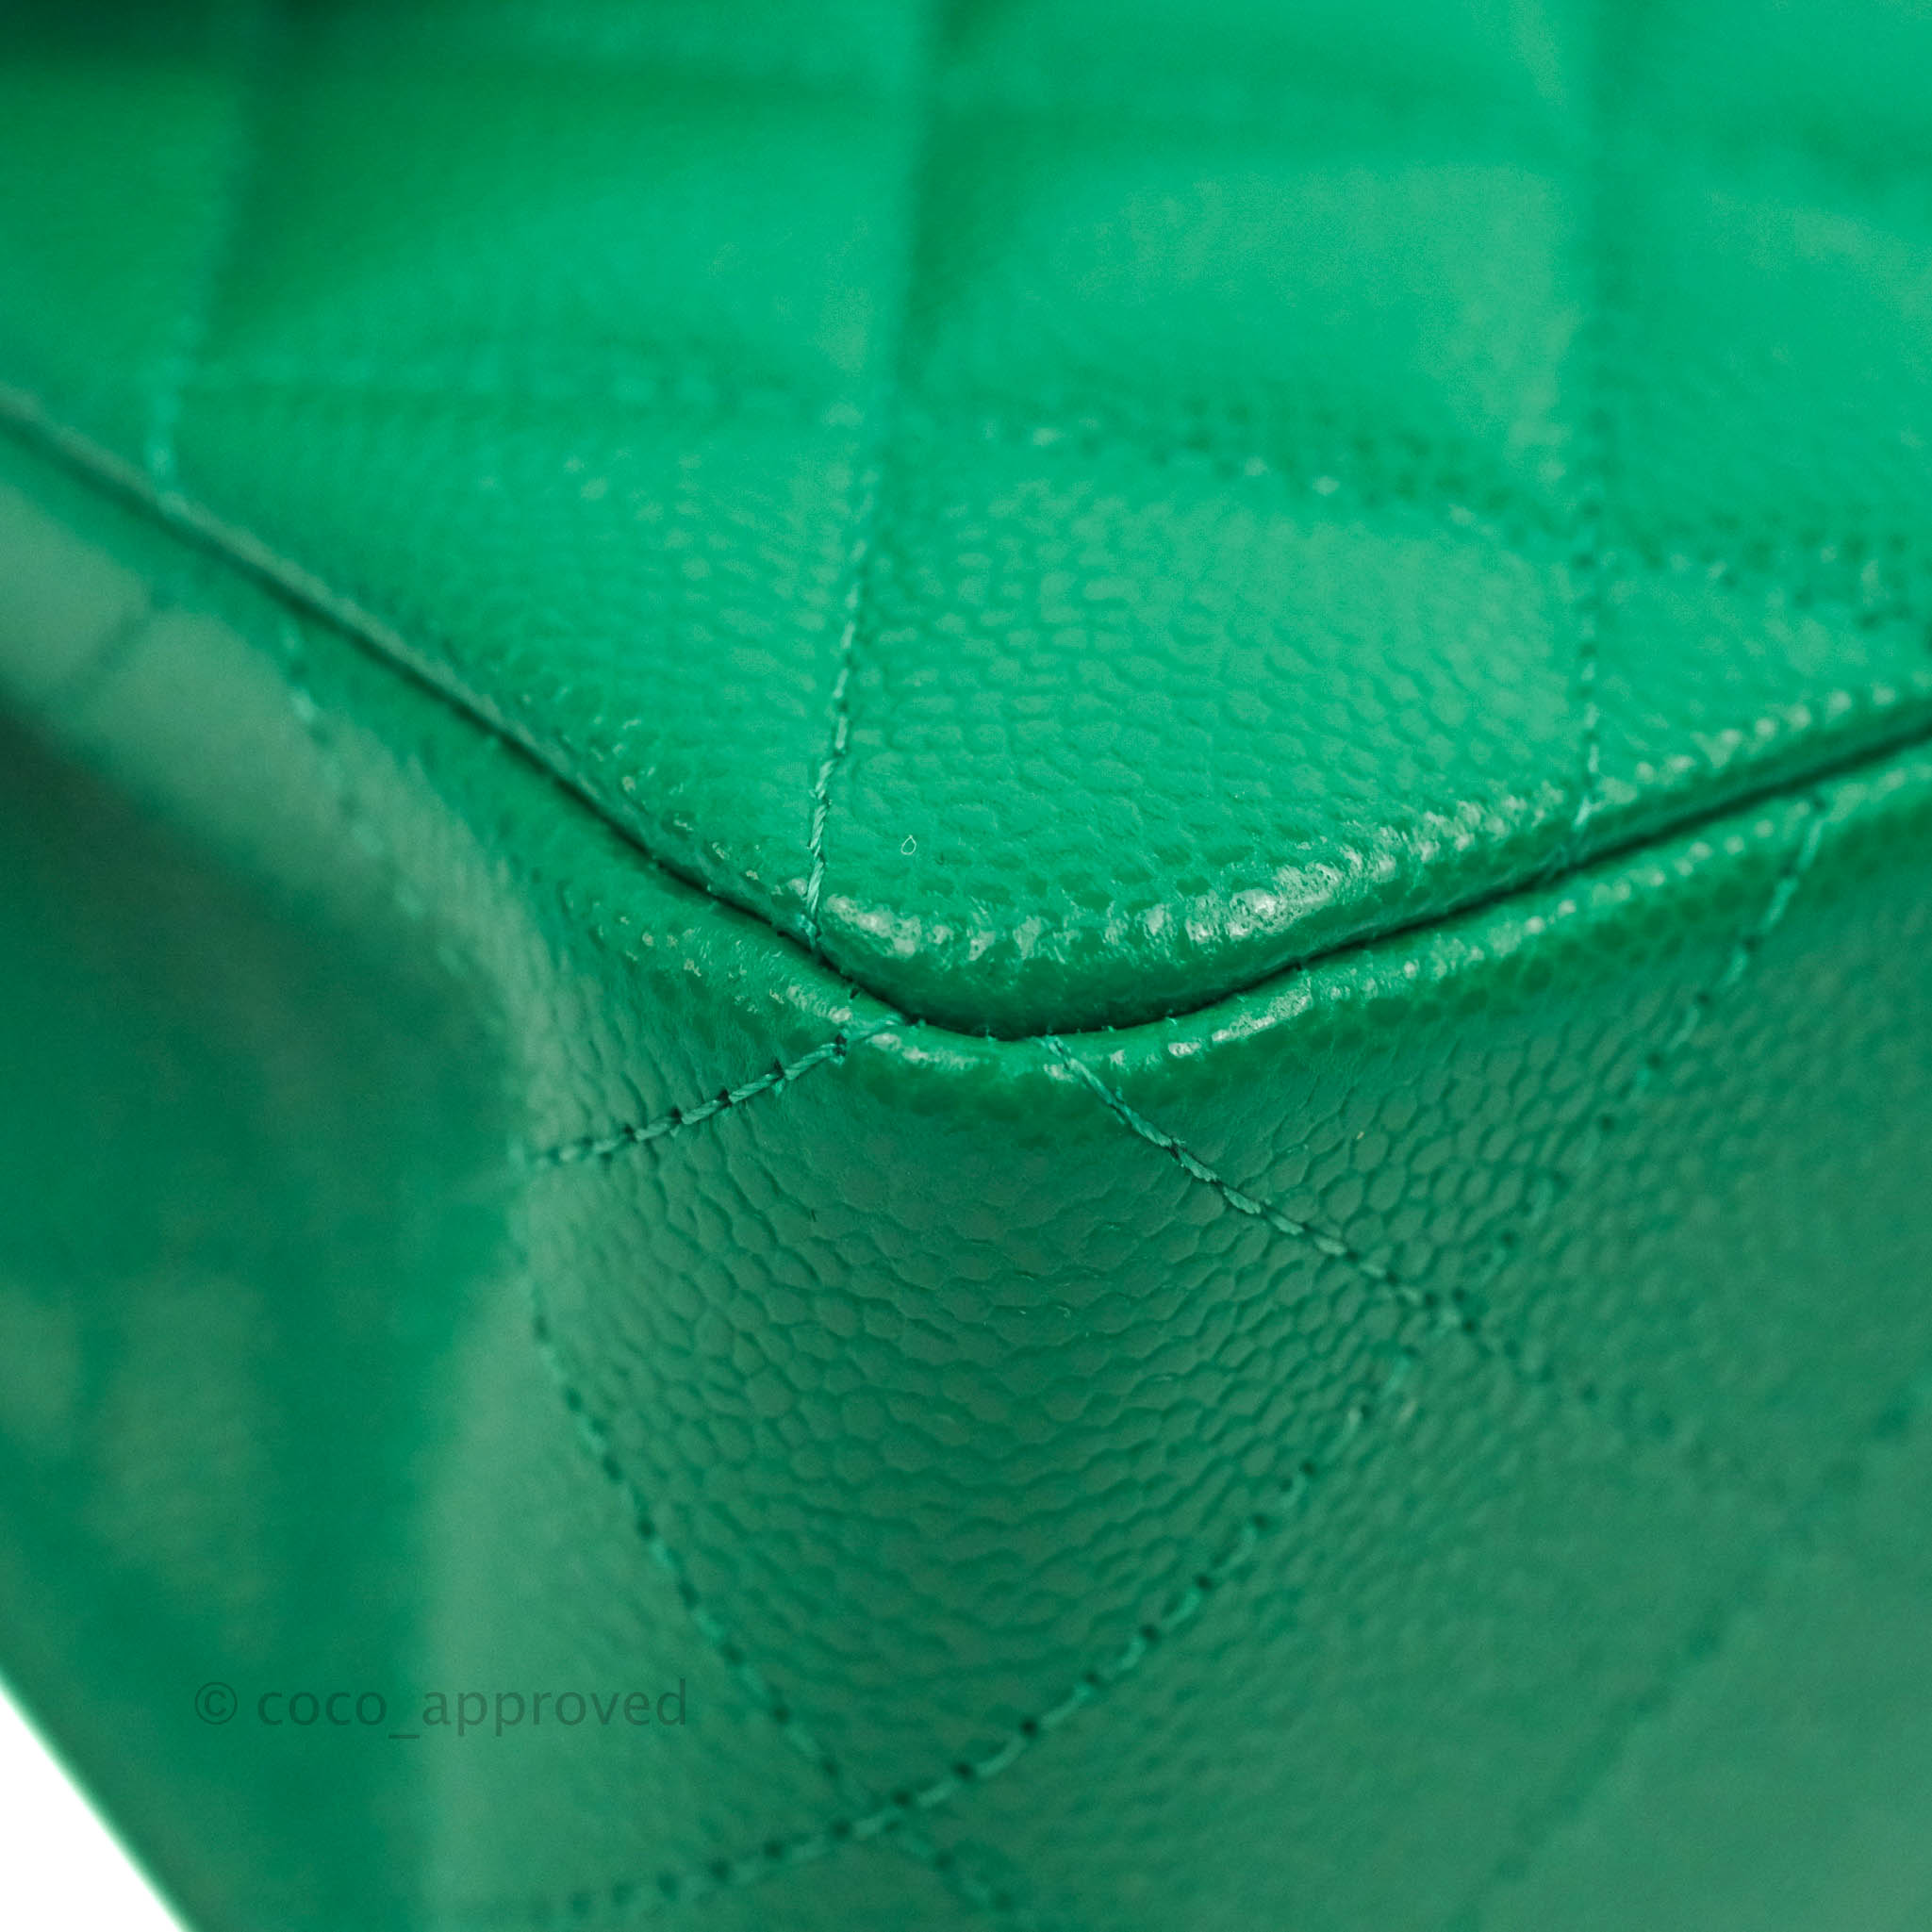 Chanel Green Quilted Patent Leather Mini Rectangular Classic Flap